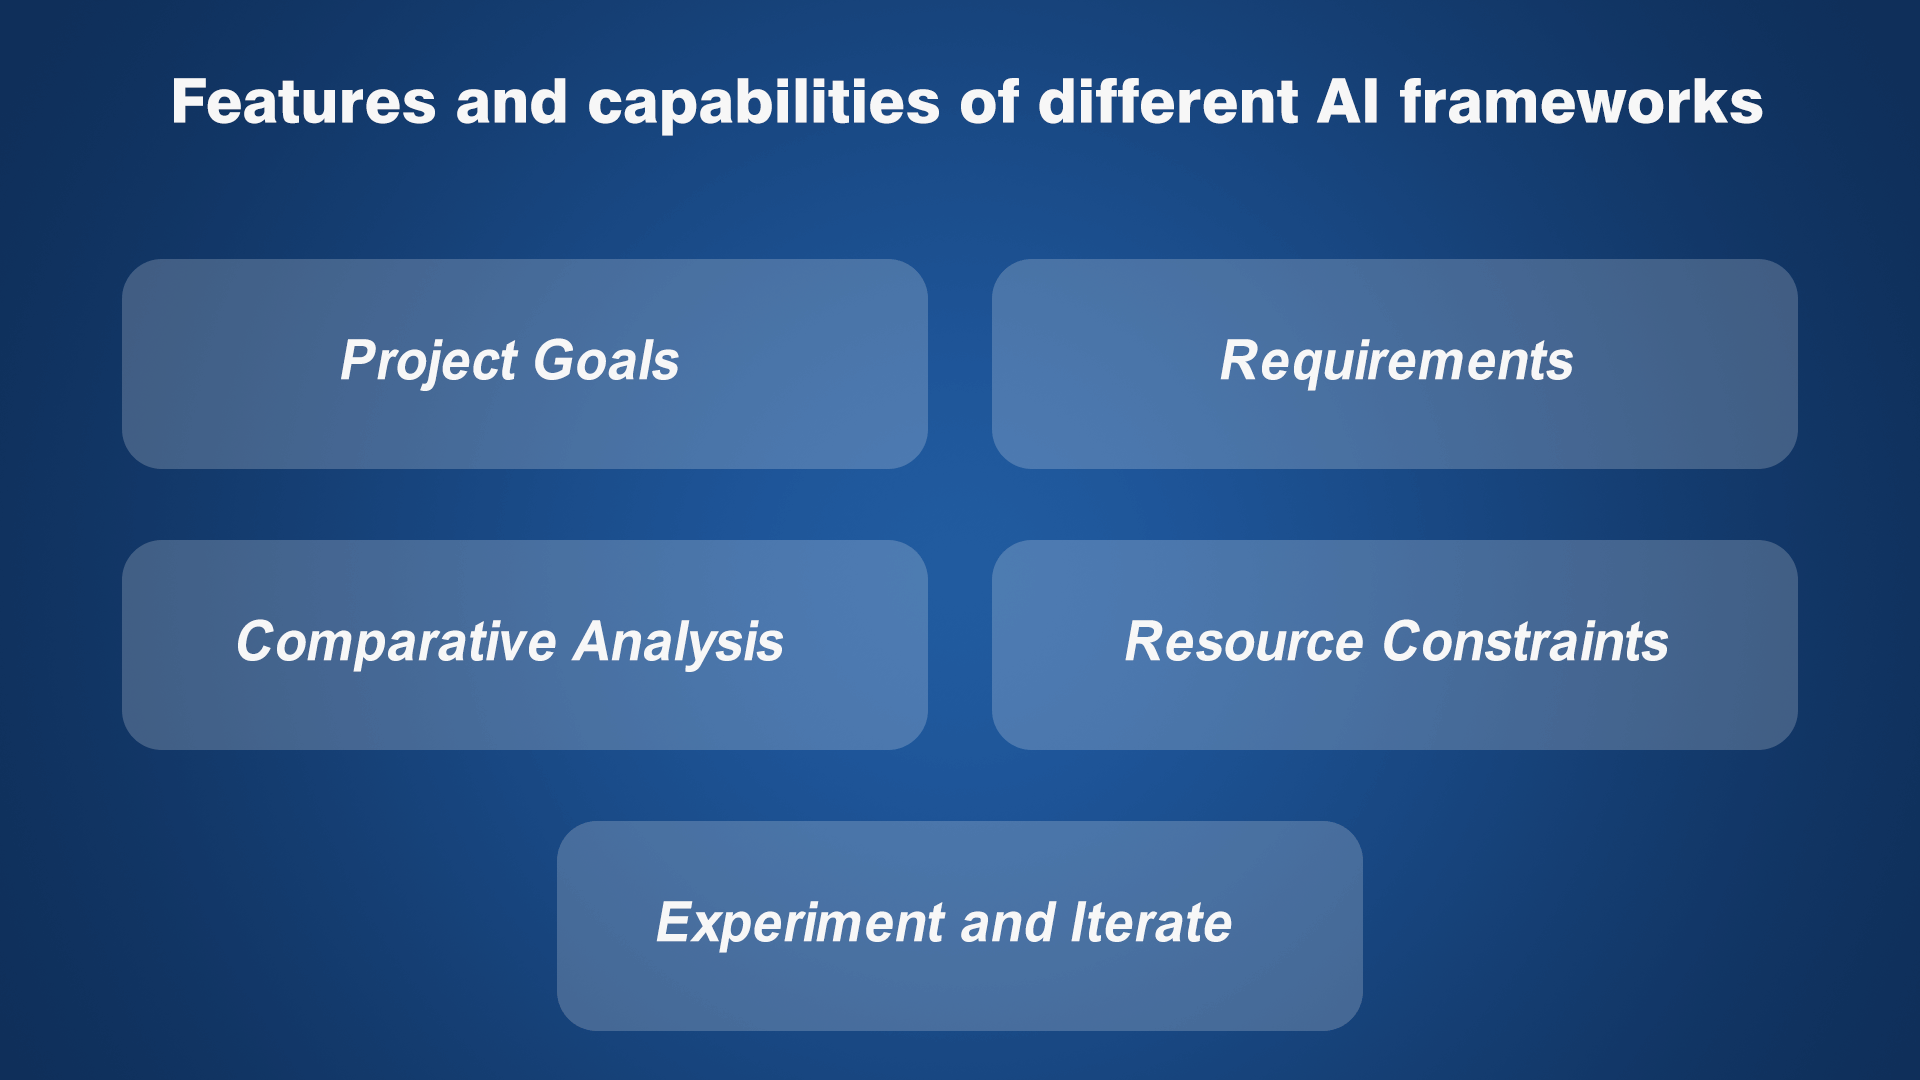 Features and capabilities of different AI frameworks